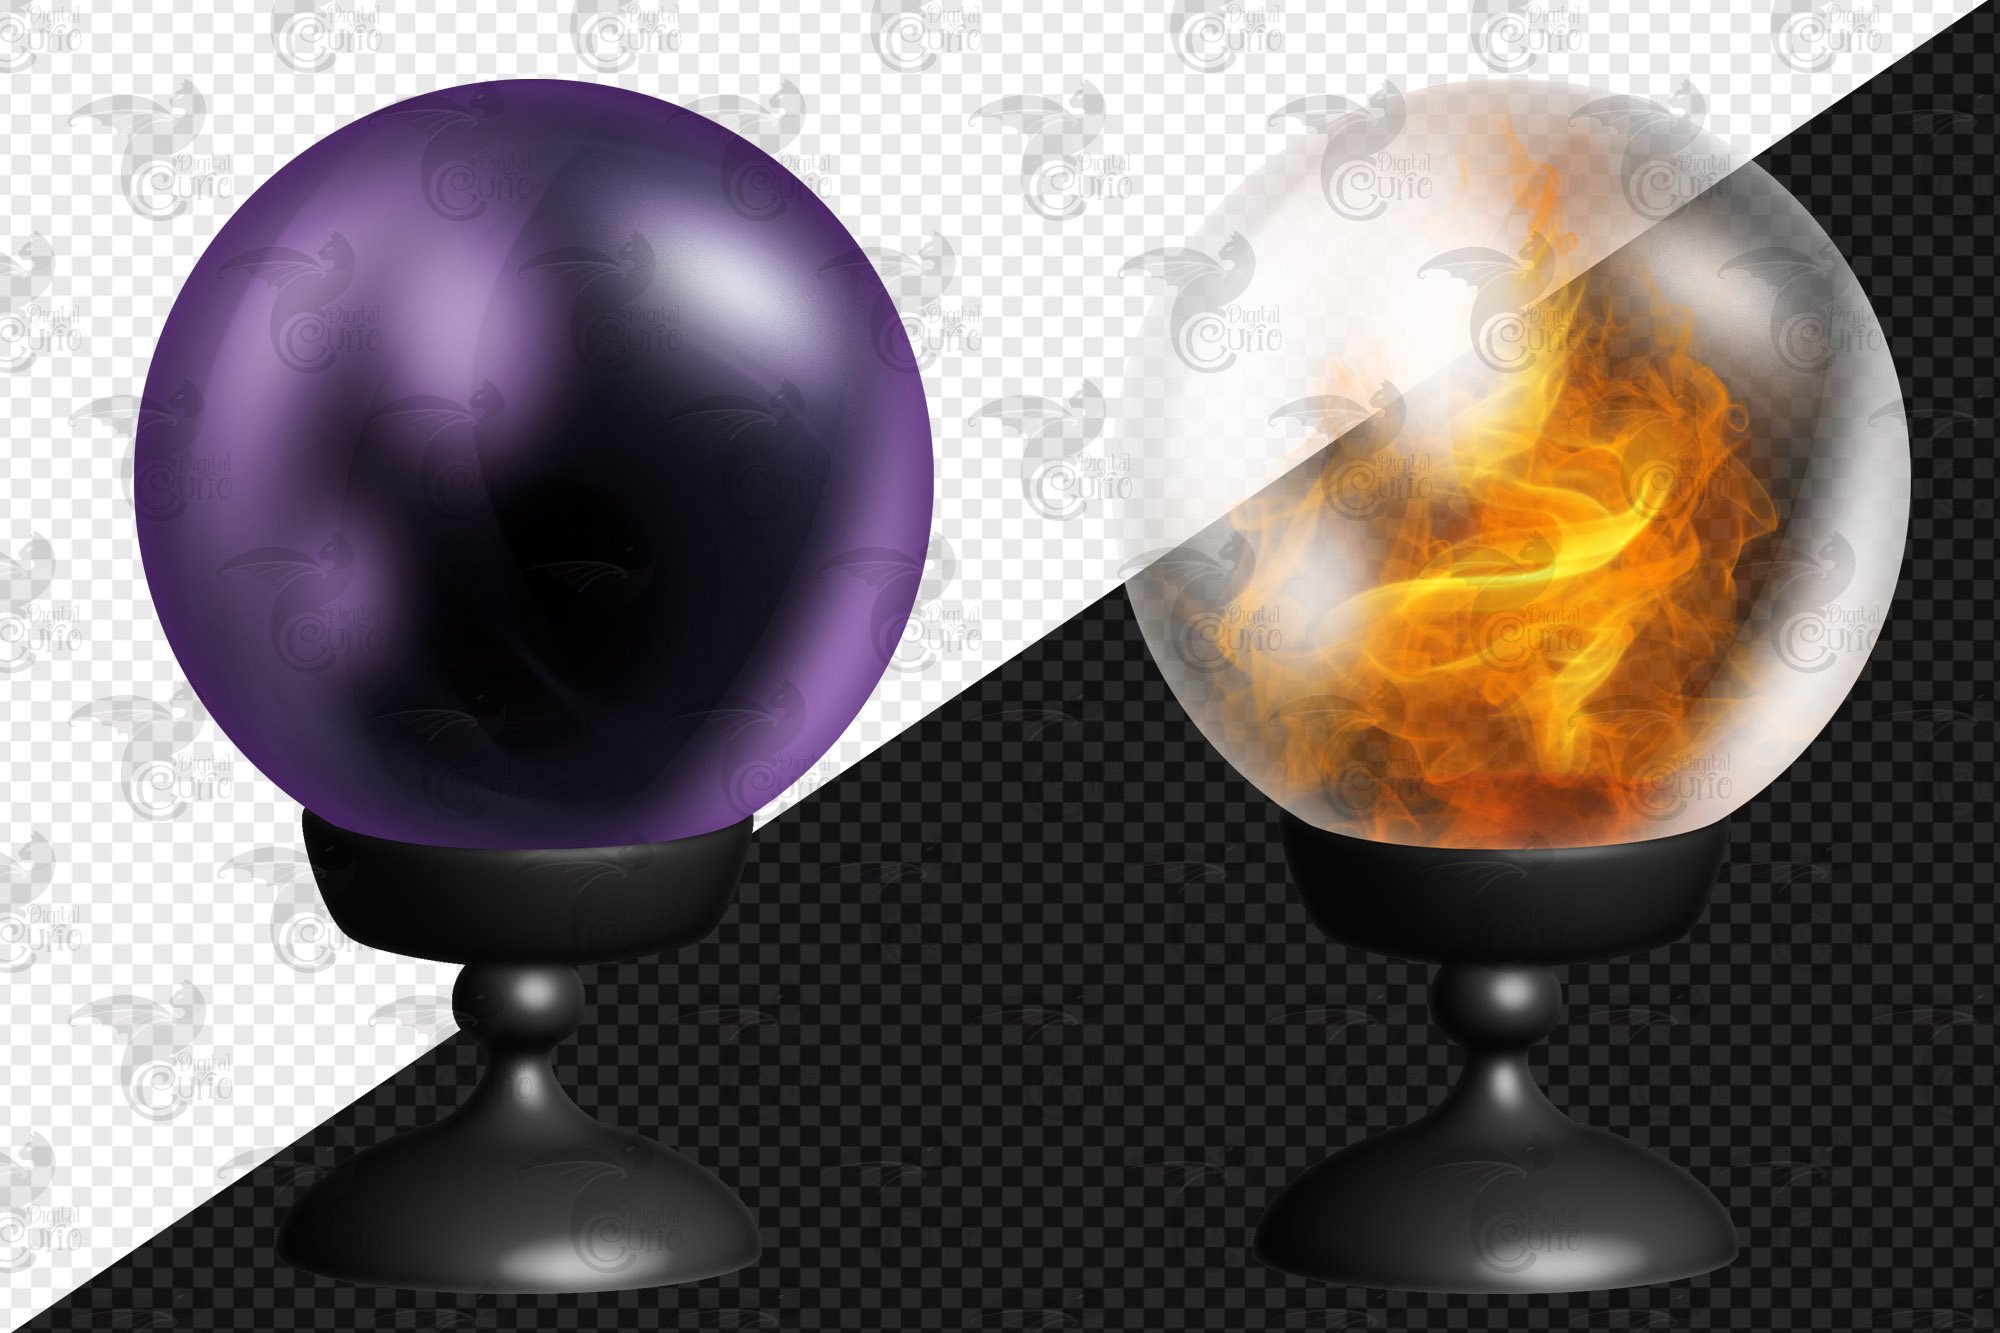 Crystal Ball Clipart preview image.